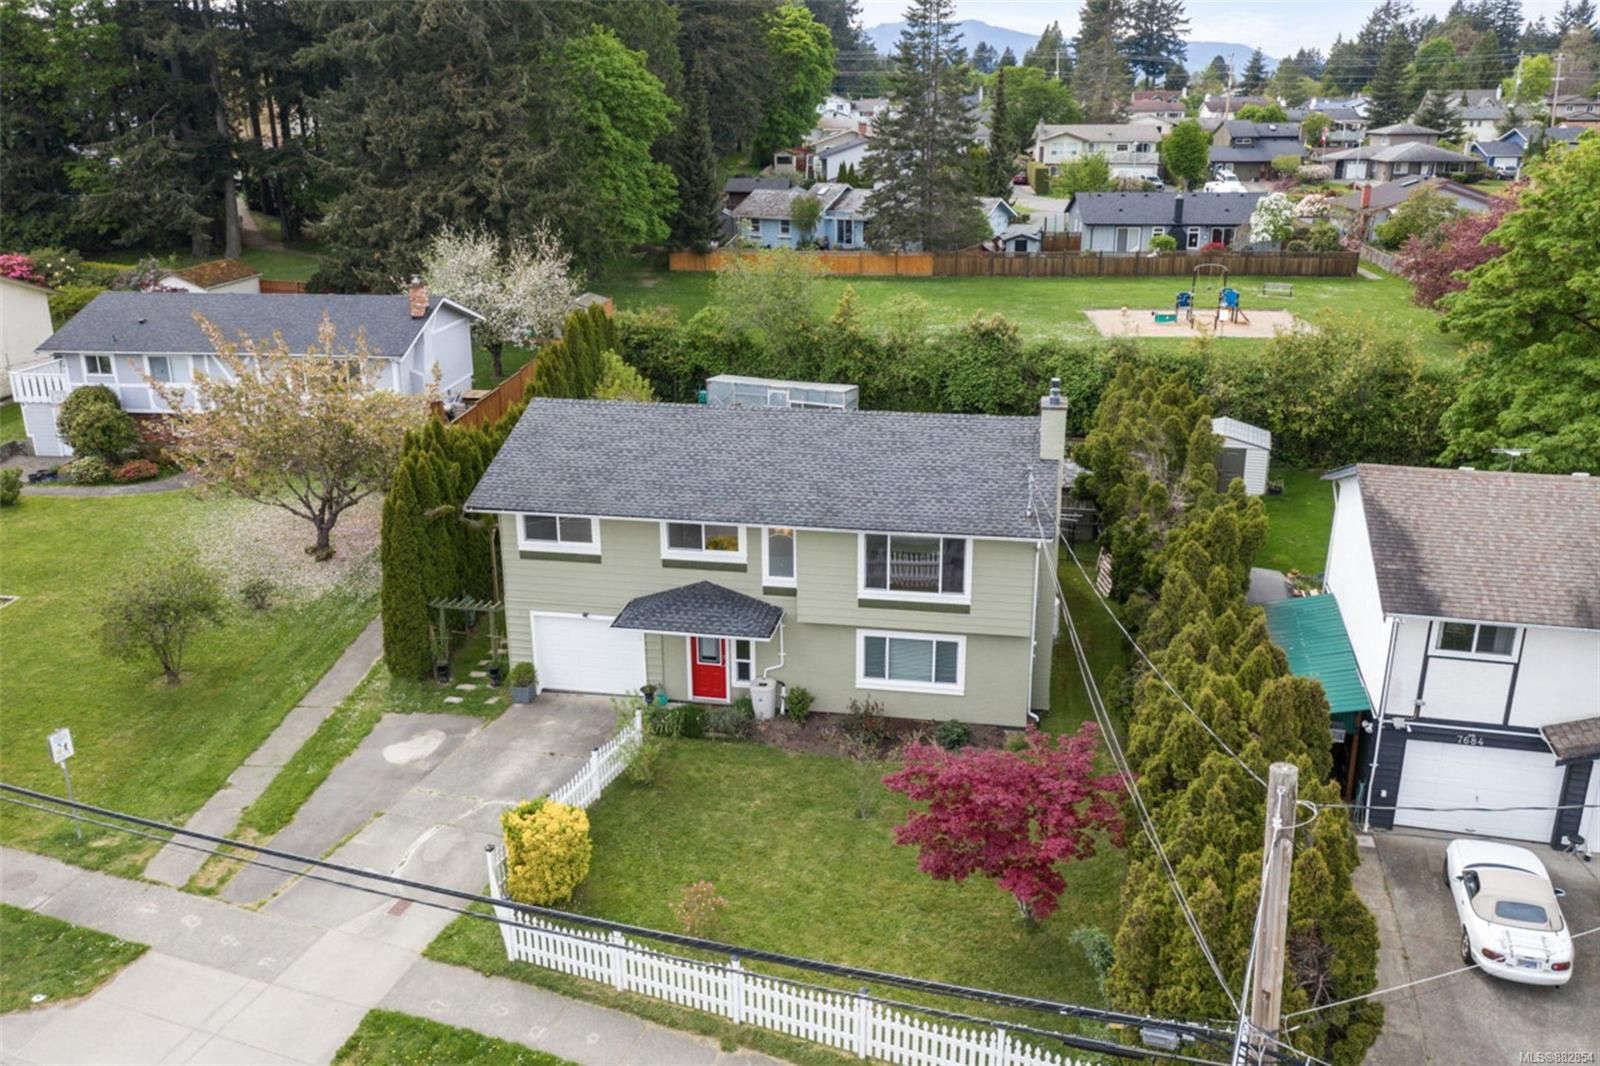 I have sold a property at 7678 East Saanich Rd
